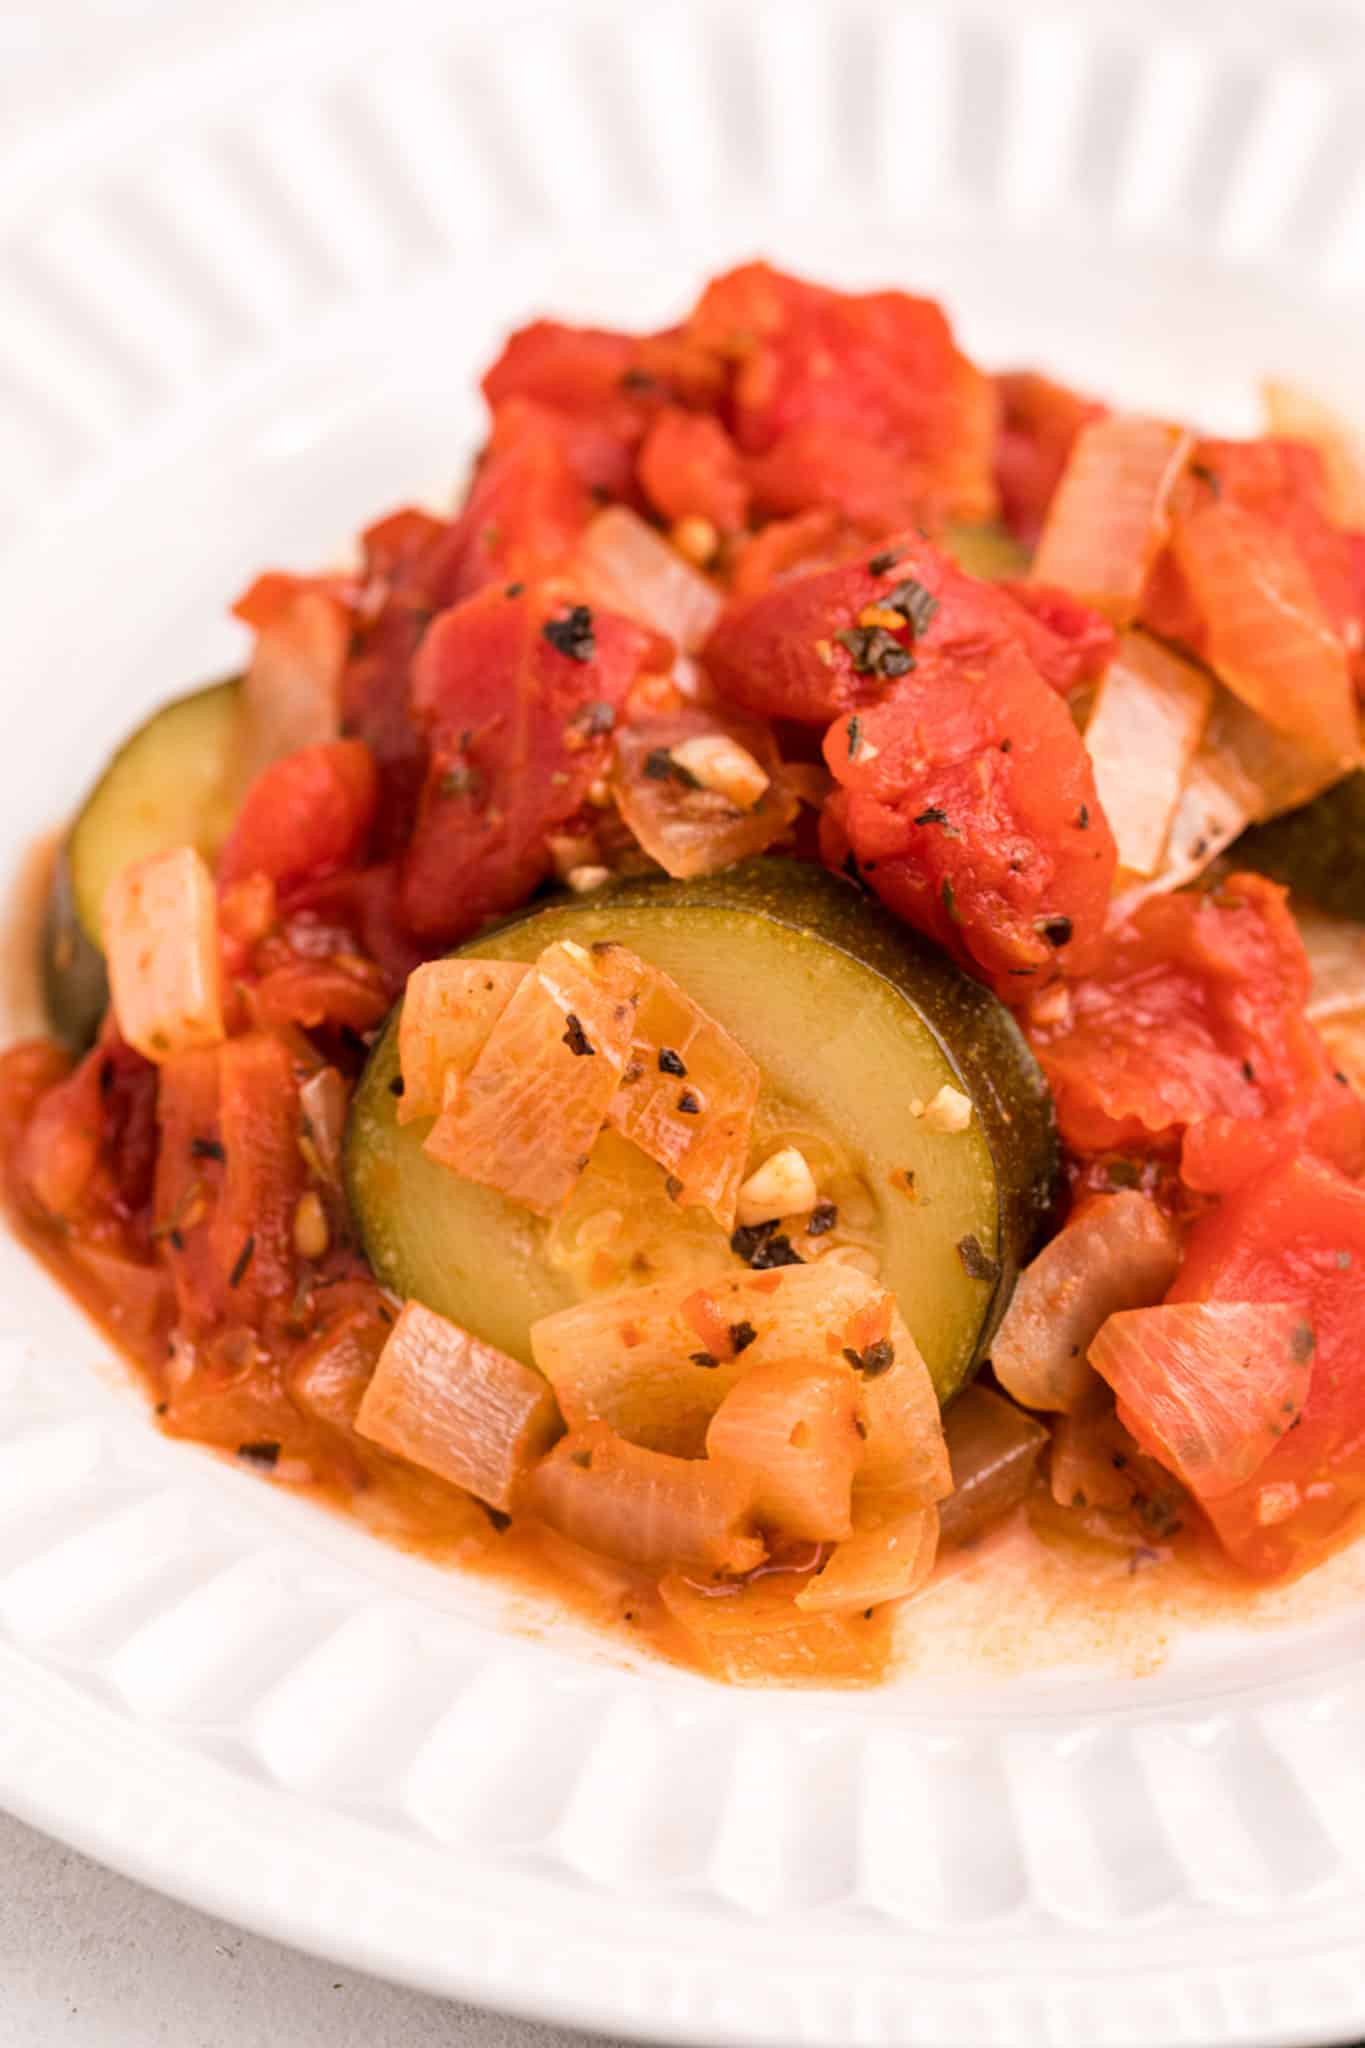 up close photo of cooked zucchini with onions, garlic and tomatoes